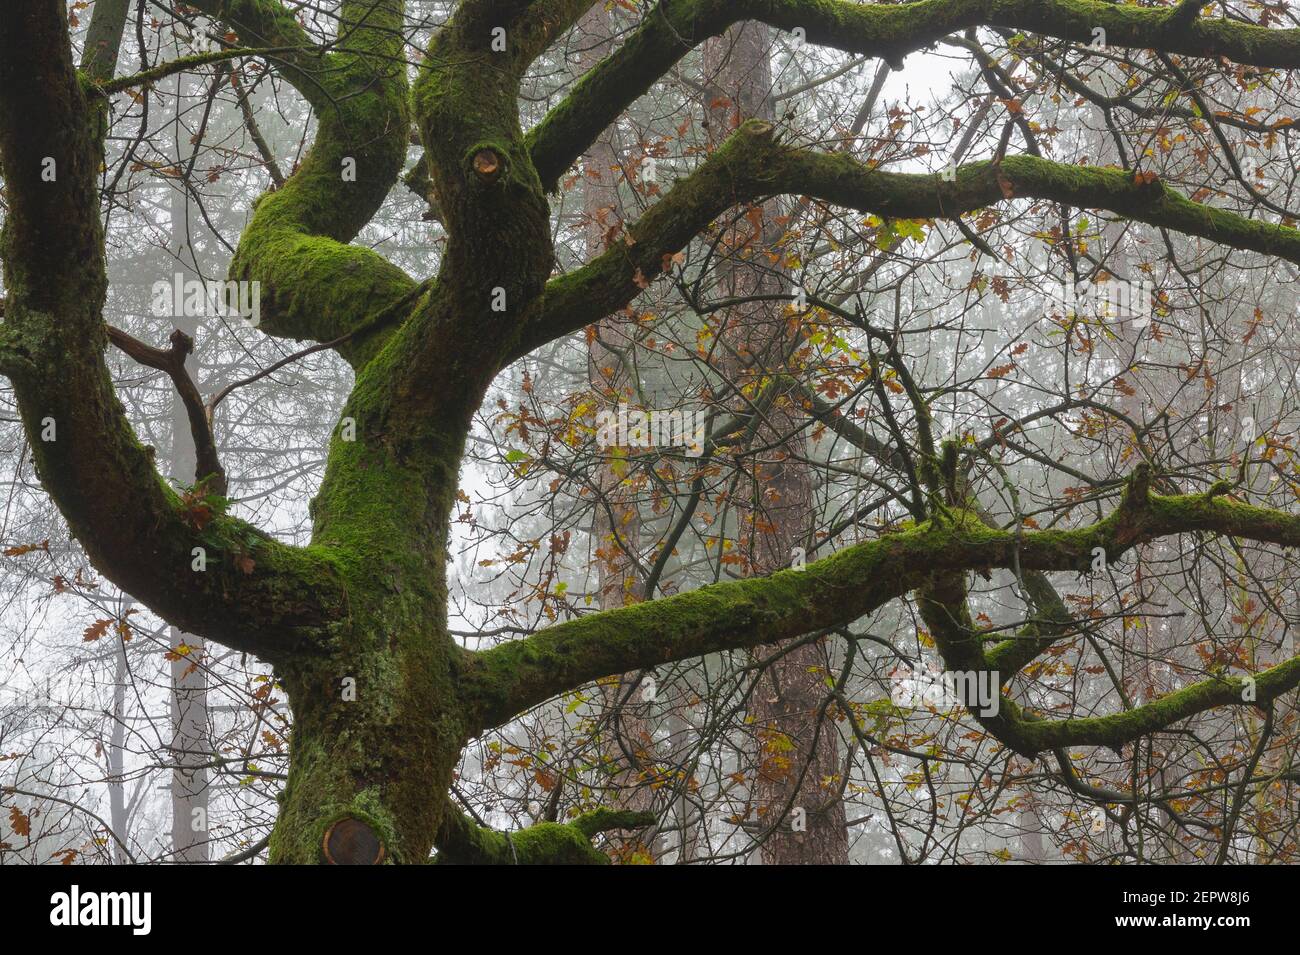 Mossy branches of a gnarled old oak tree in a misty background, Veluwe, Netherlands Stock Photo